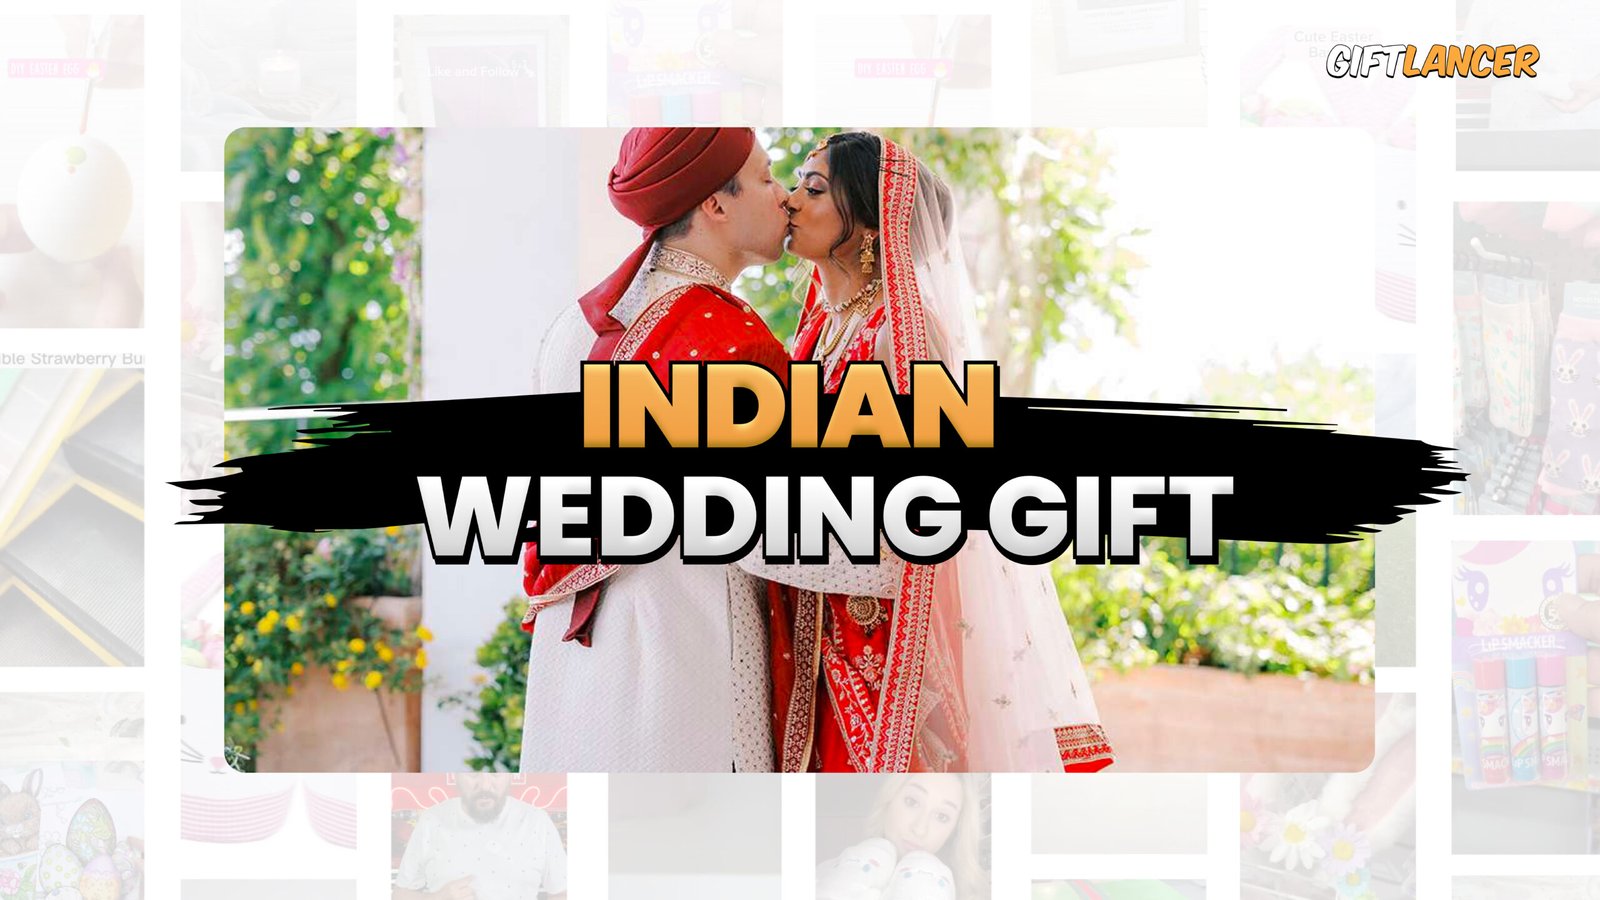 Wedding Gift Ideas For Couples In India – Top 20 Wedding Gift Picks by Indian Couple Vloggers 